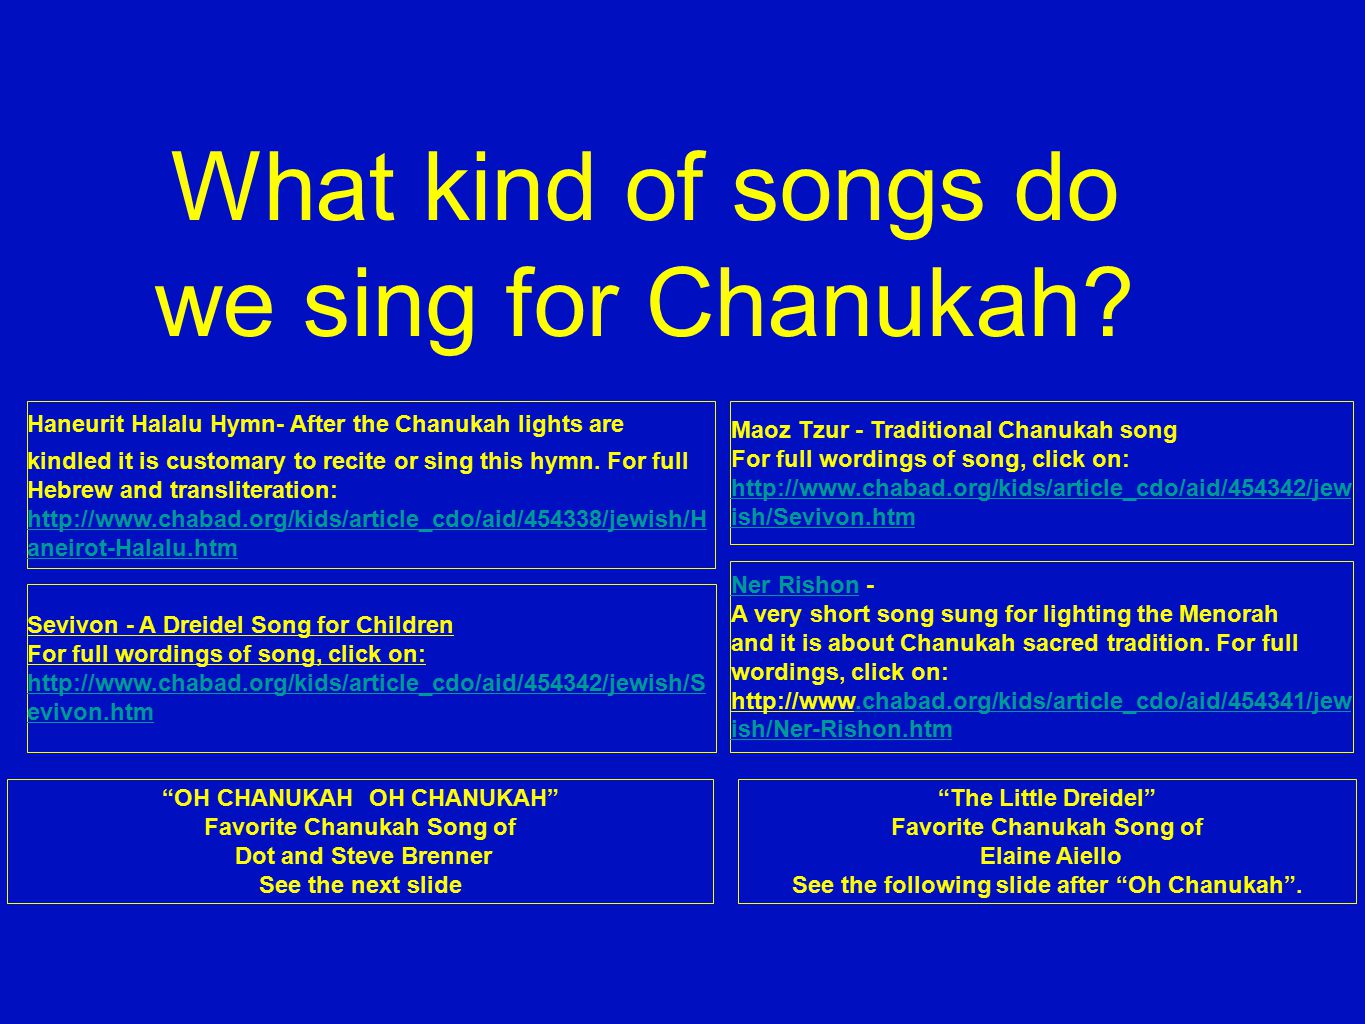 What kind of songs do we sing for Chanukah